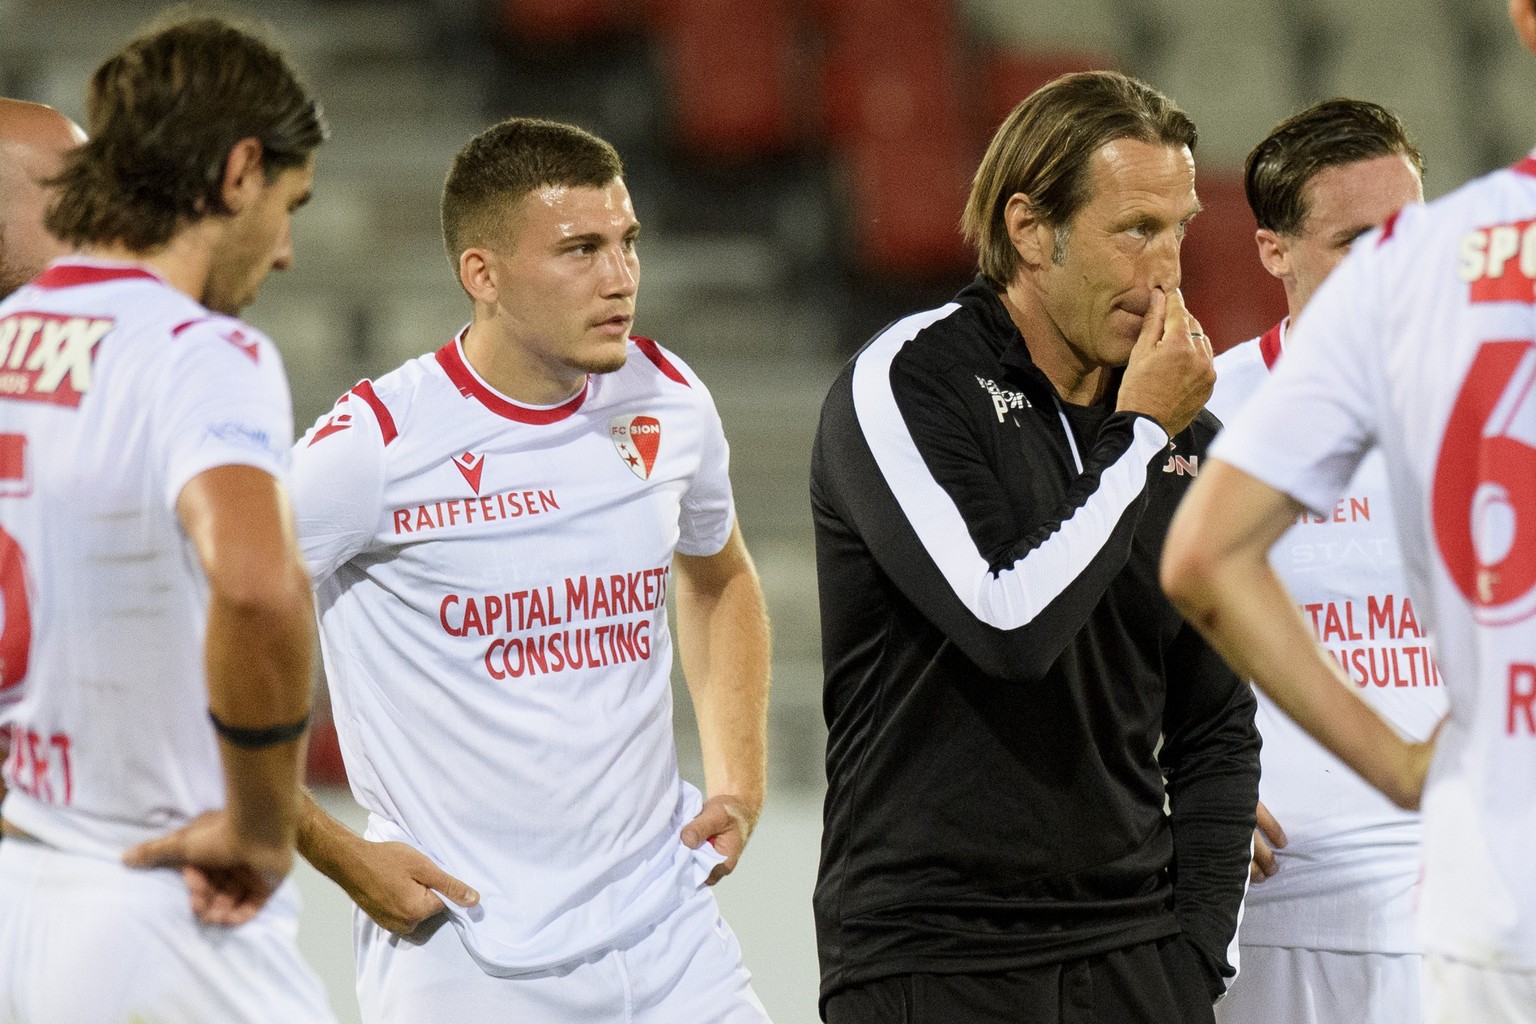 Sion&#039;s headcoach Paolo Tramezzani, right, looks desapointed next to Sion&#039;s forward Filip Stojilkovic, left, after the first Super League soccer match after the Coronavirus lockdown, between  ...